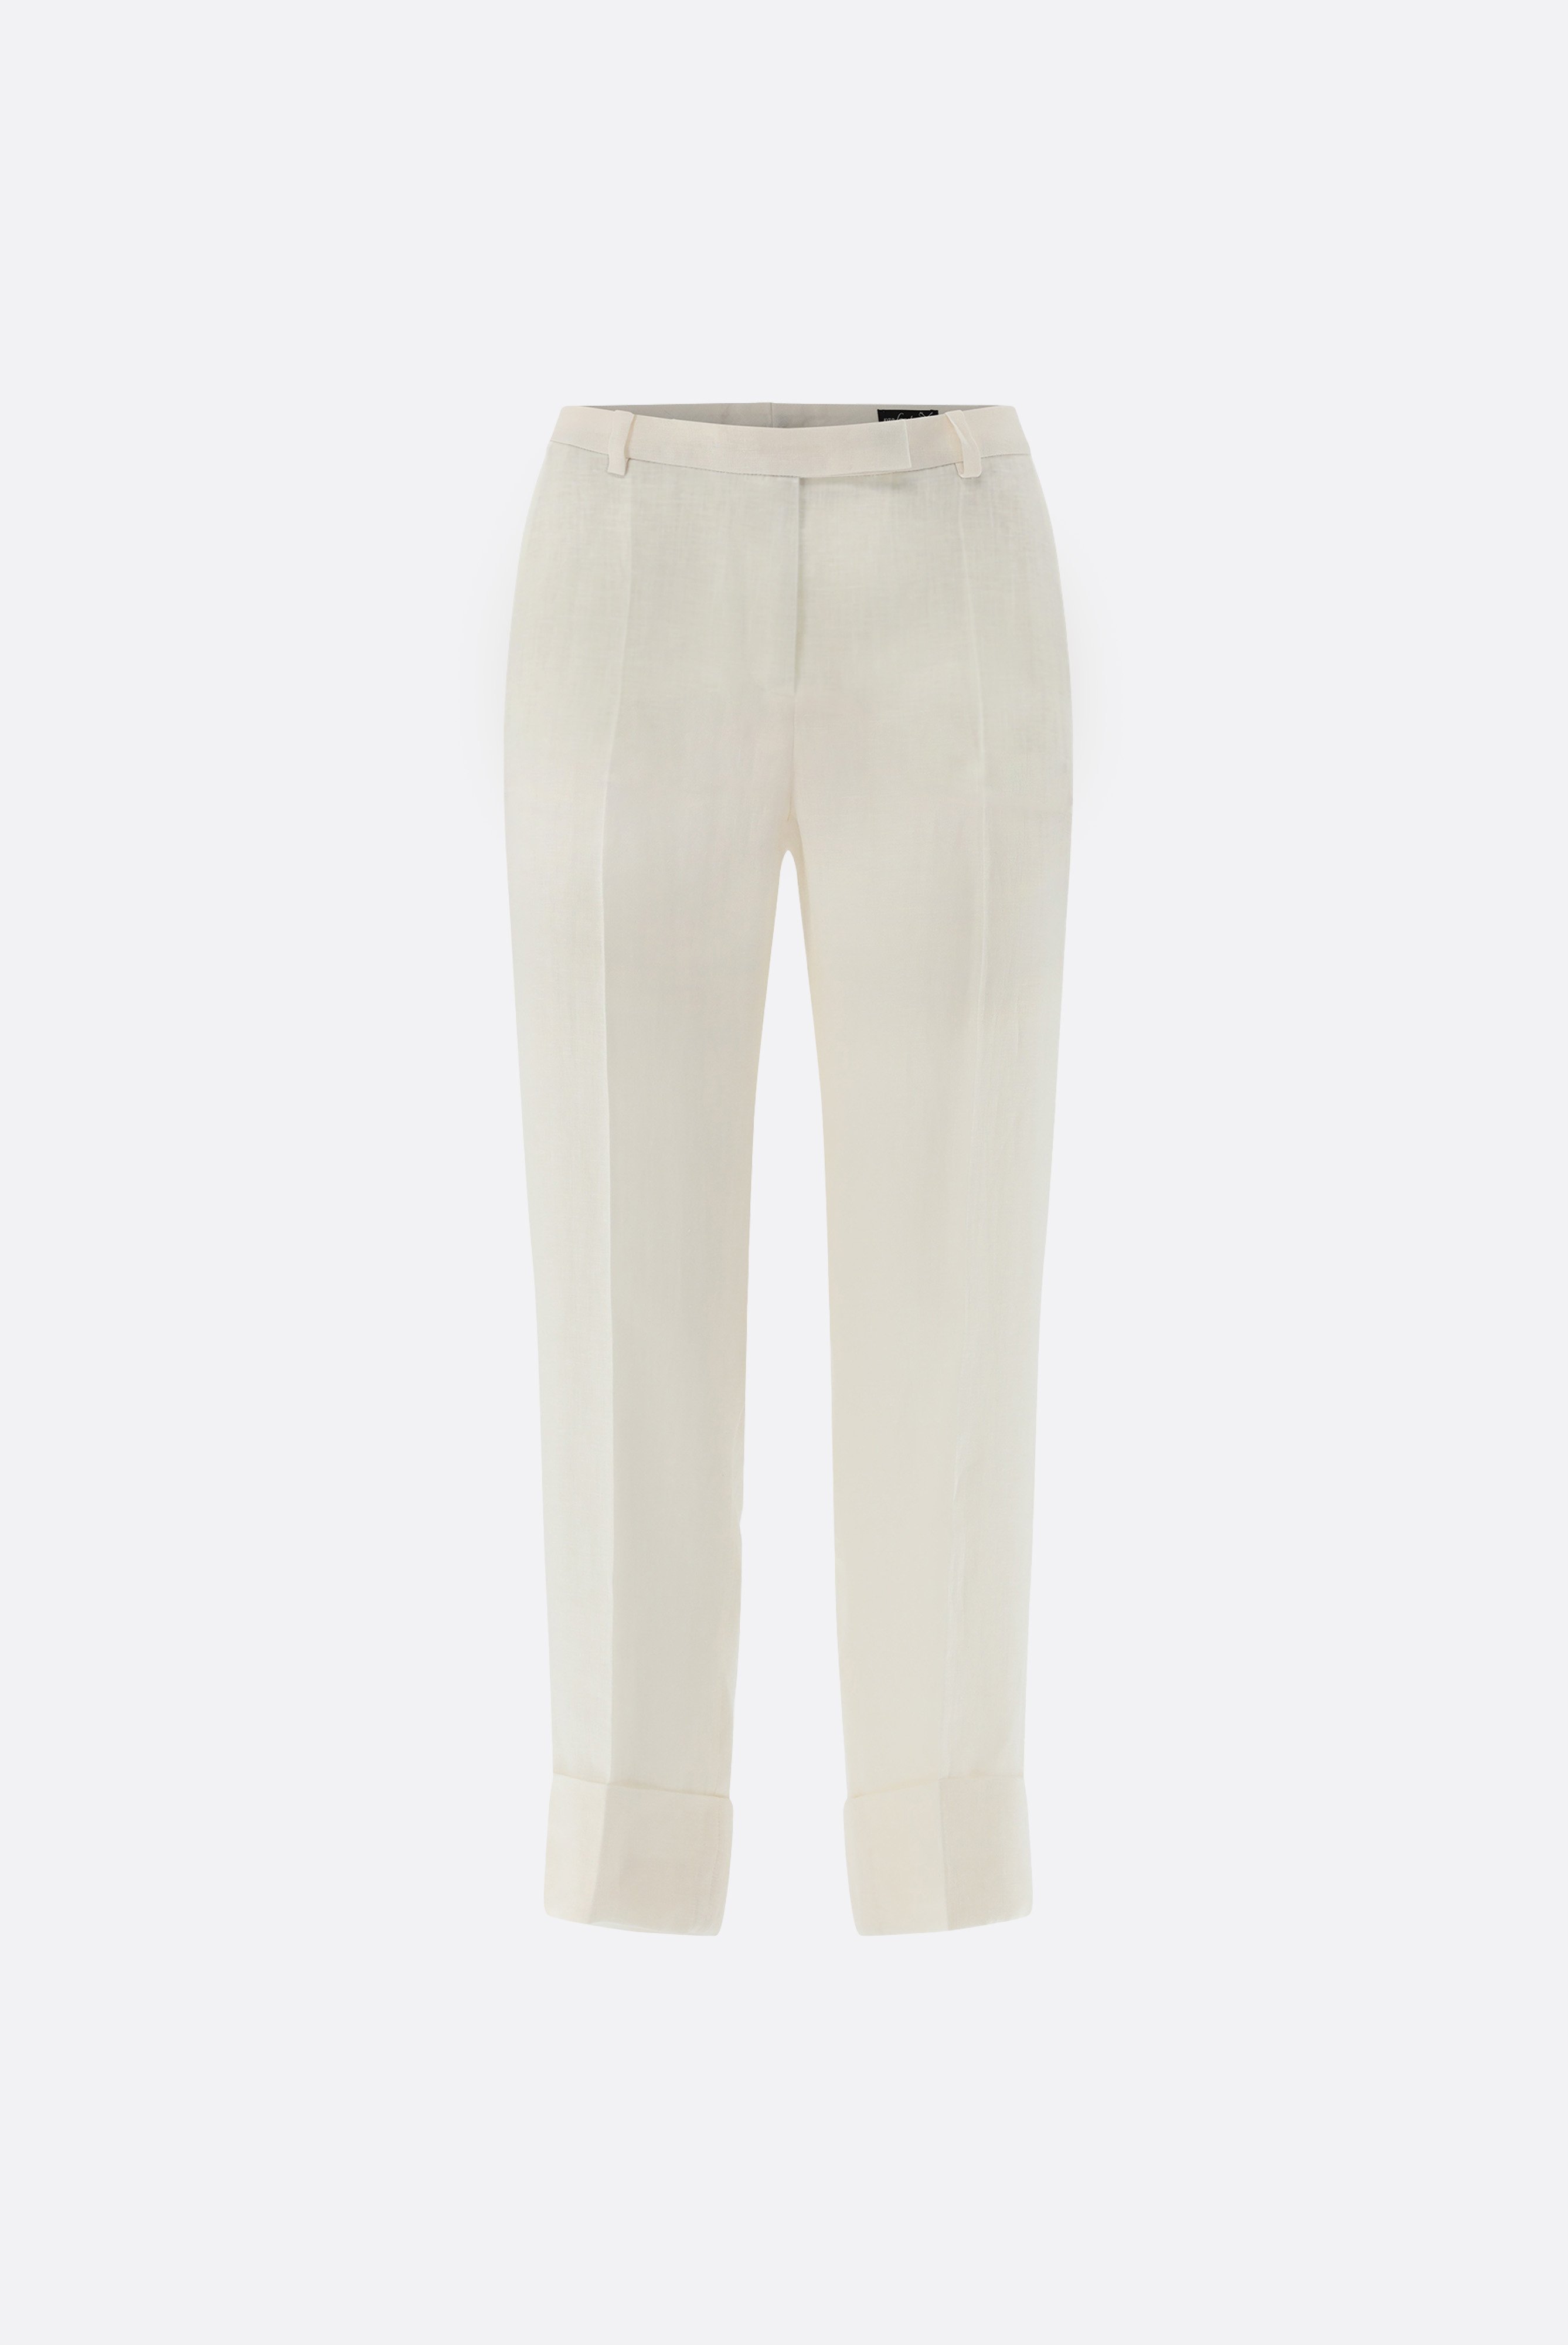 Jeans & Trousers+Linen Pants with Cuff+05.657V..H50555.110.32